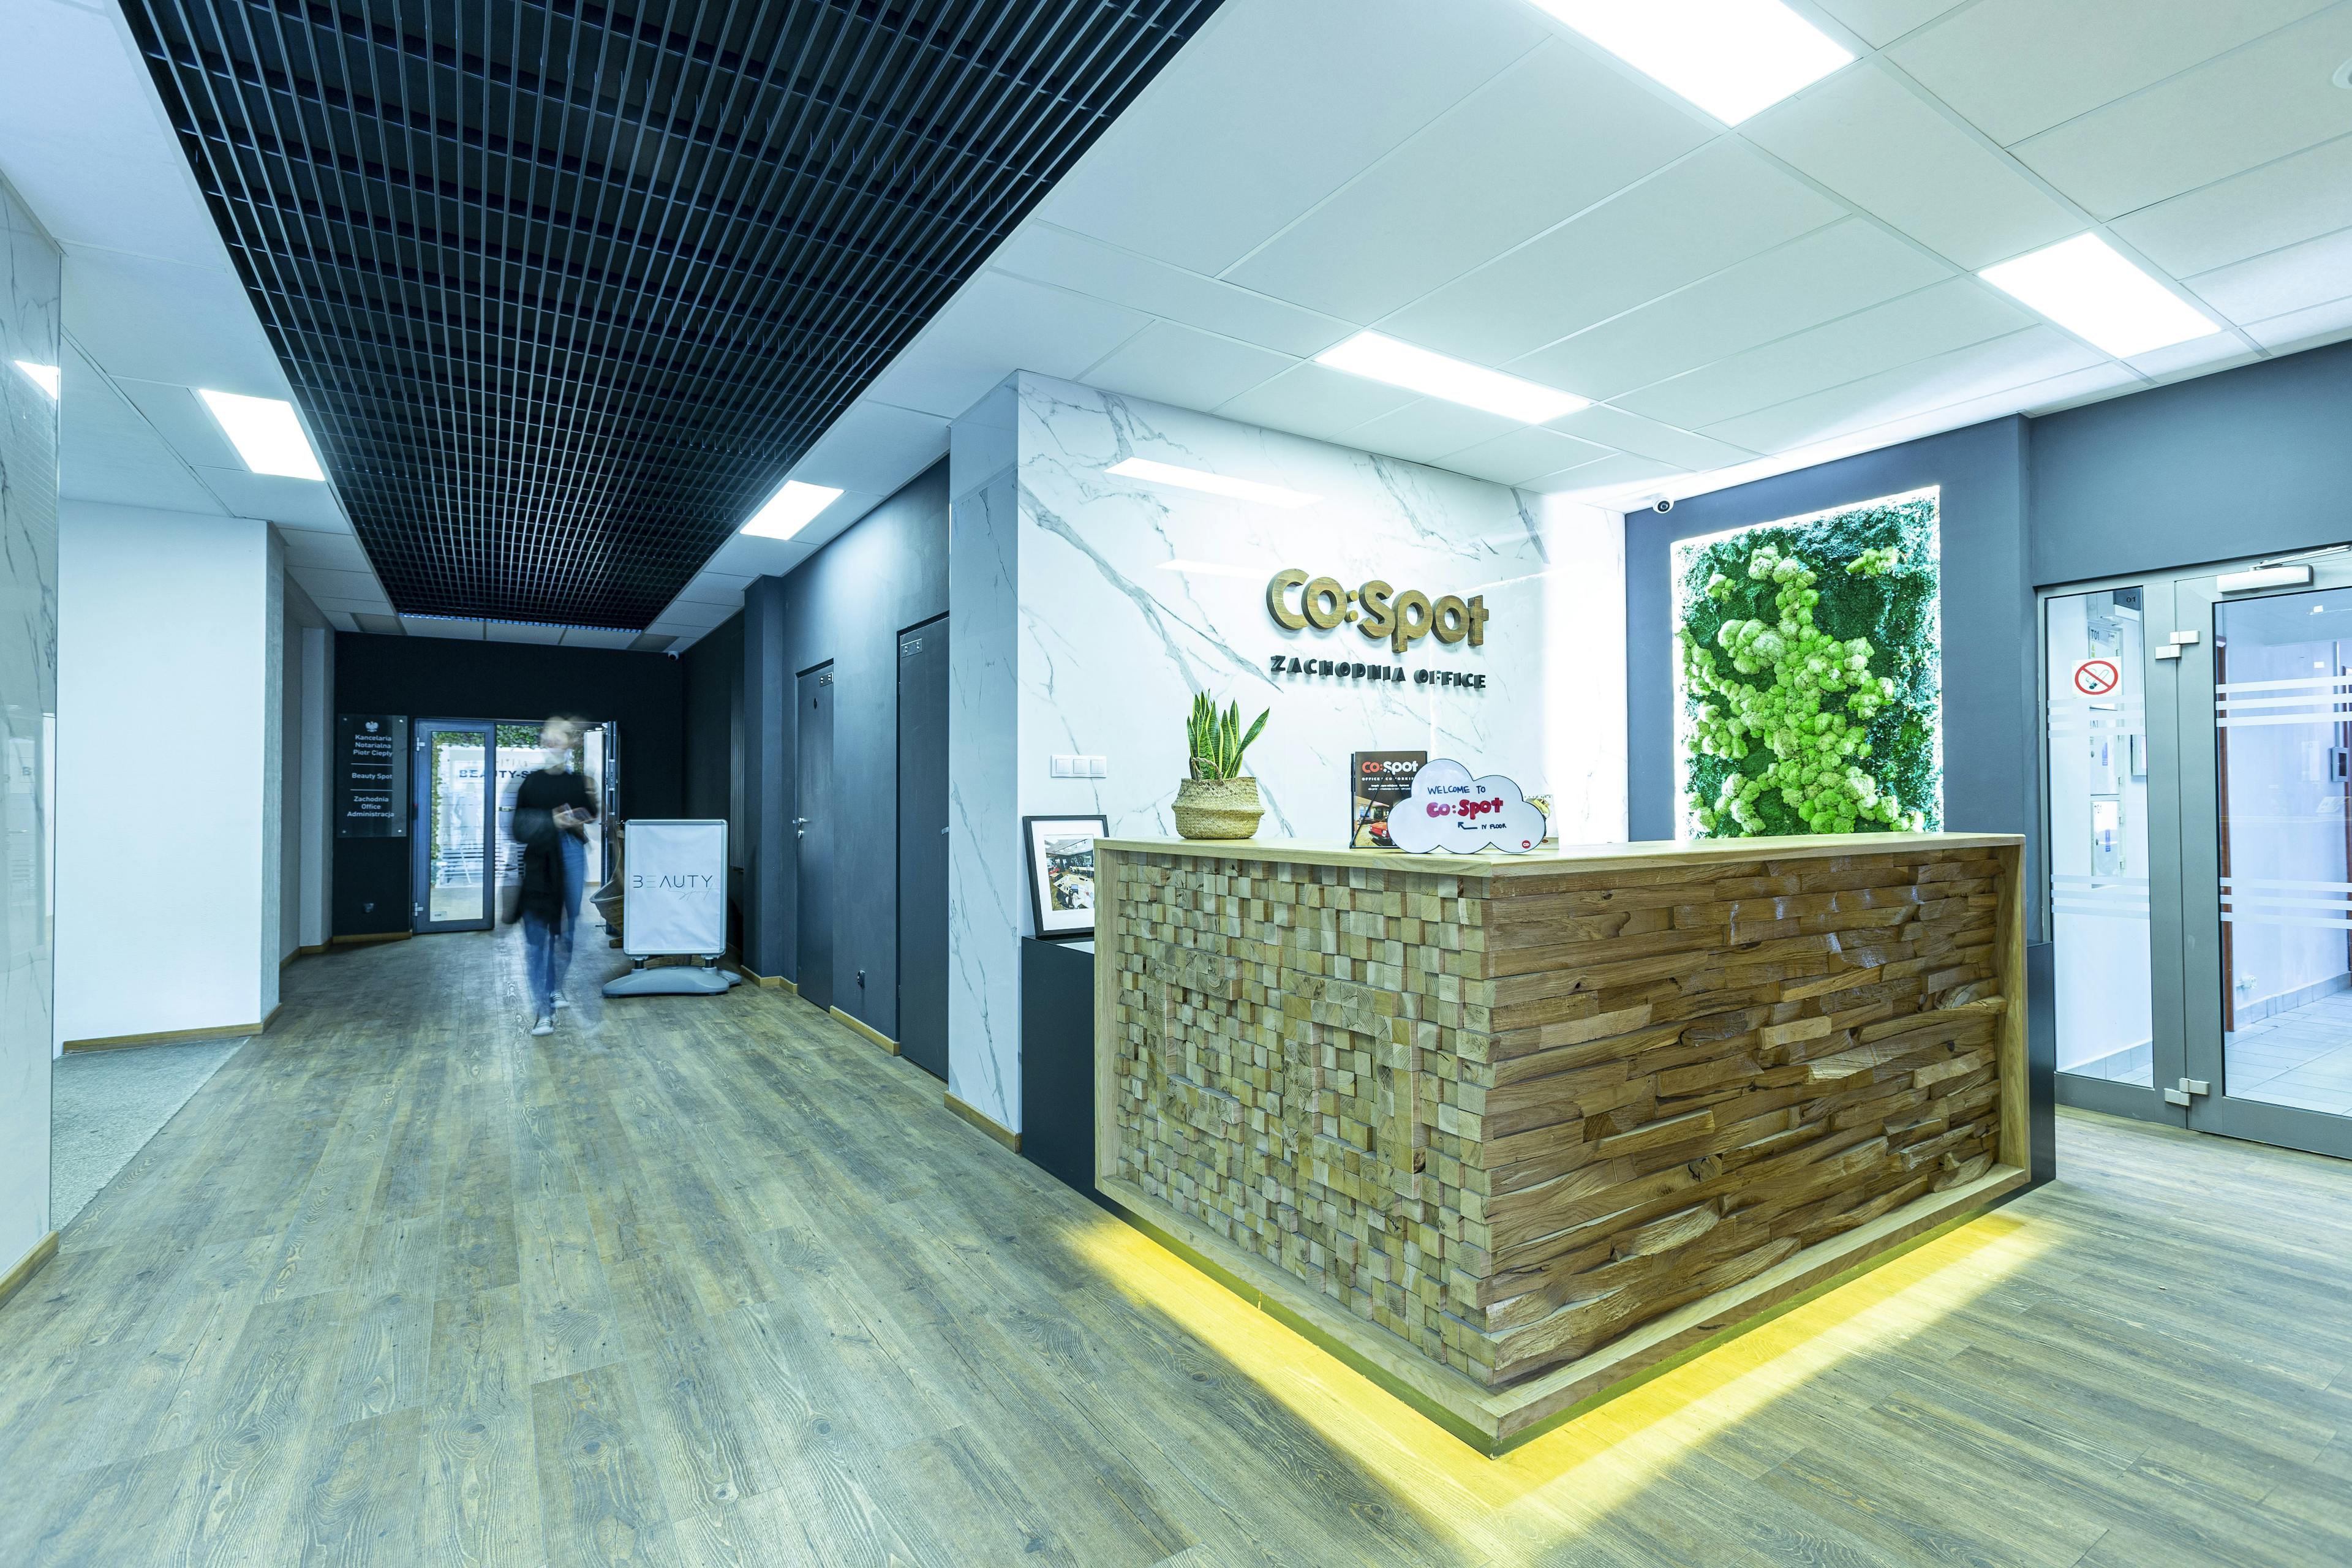  CoSpot office and coworking #2